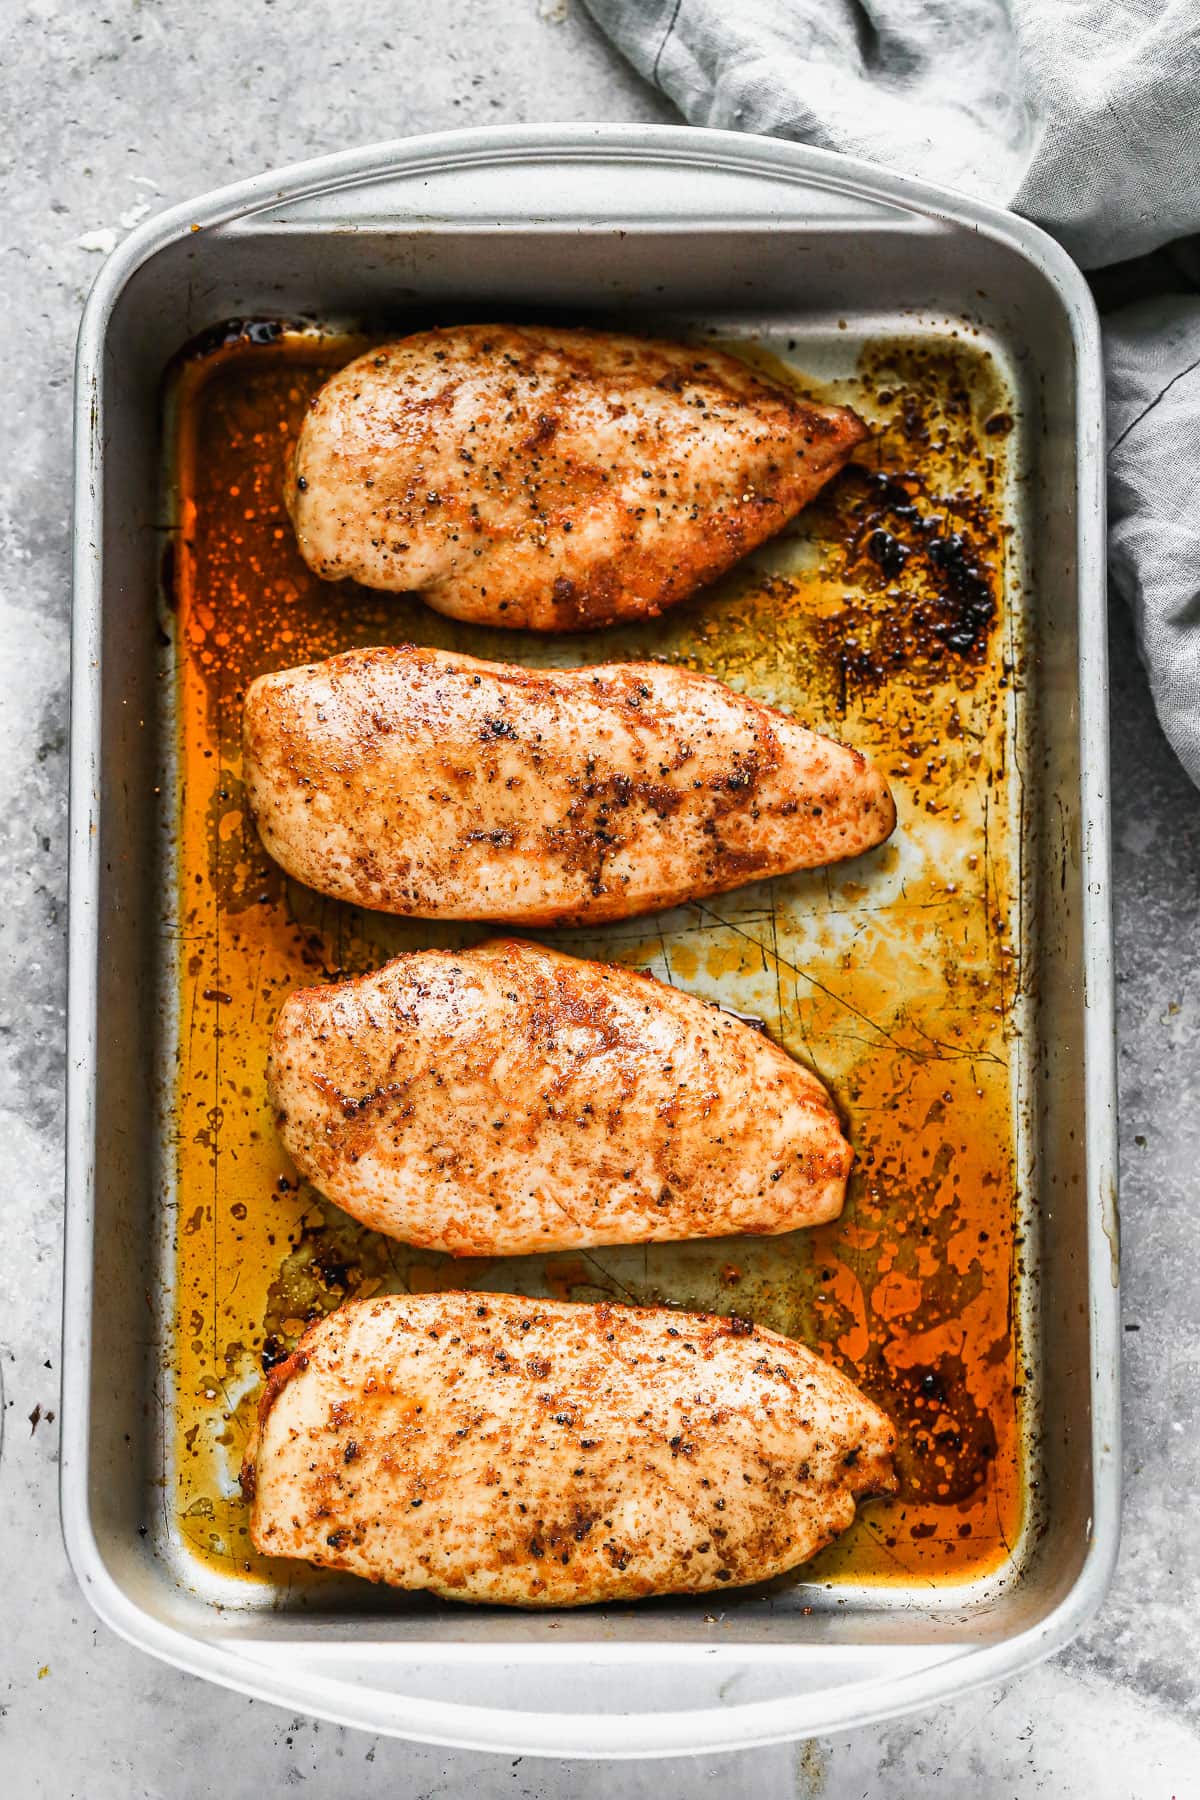 Four oven roasted chicken breasts in a pan